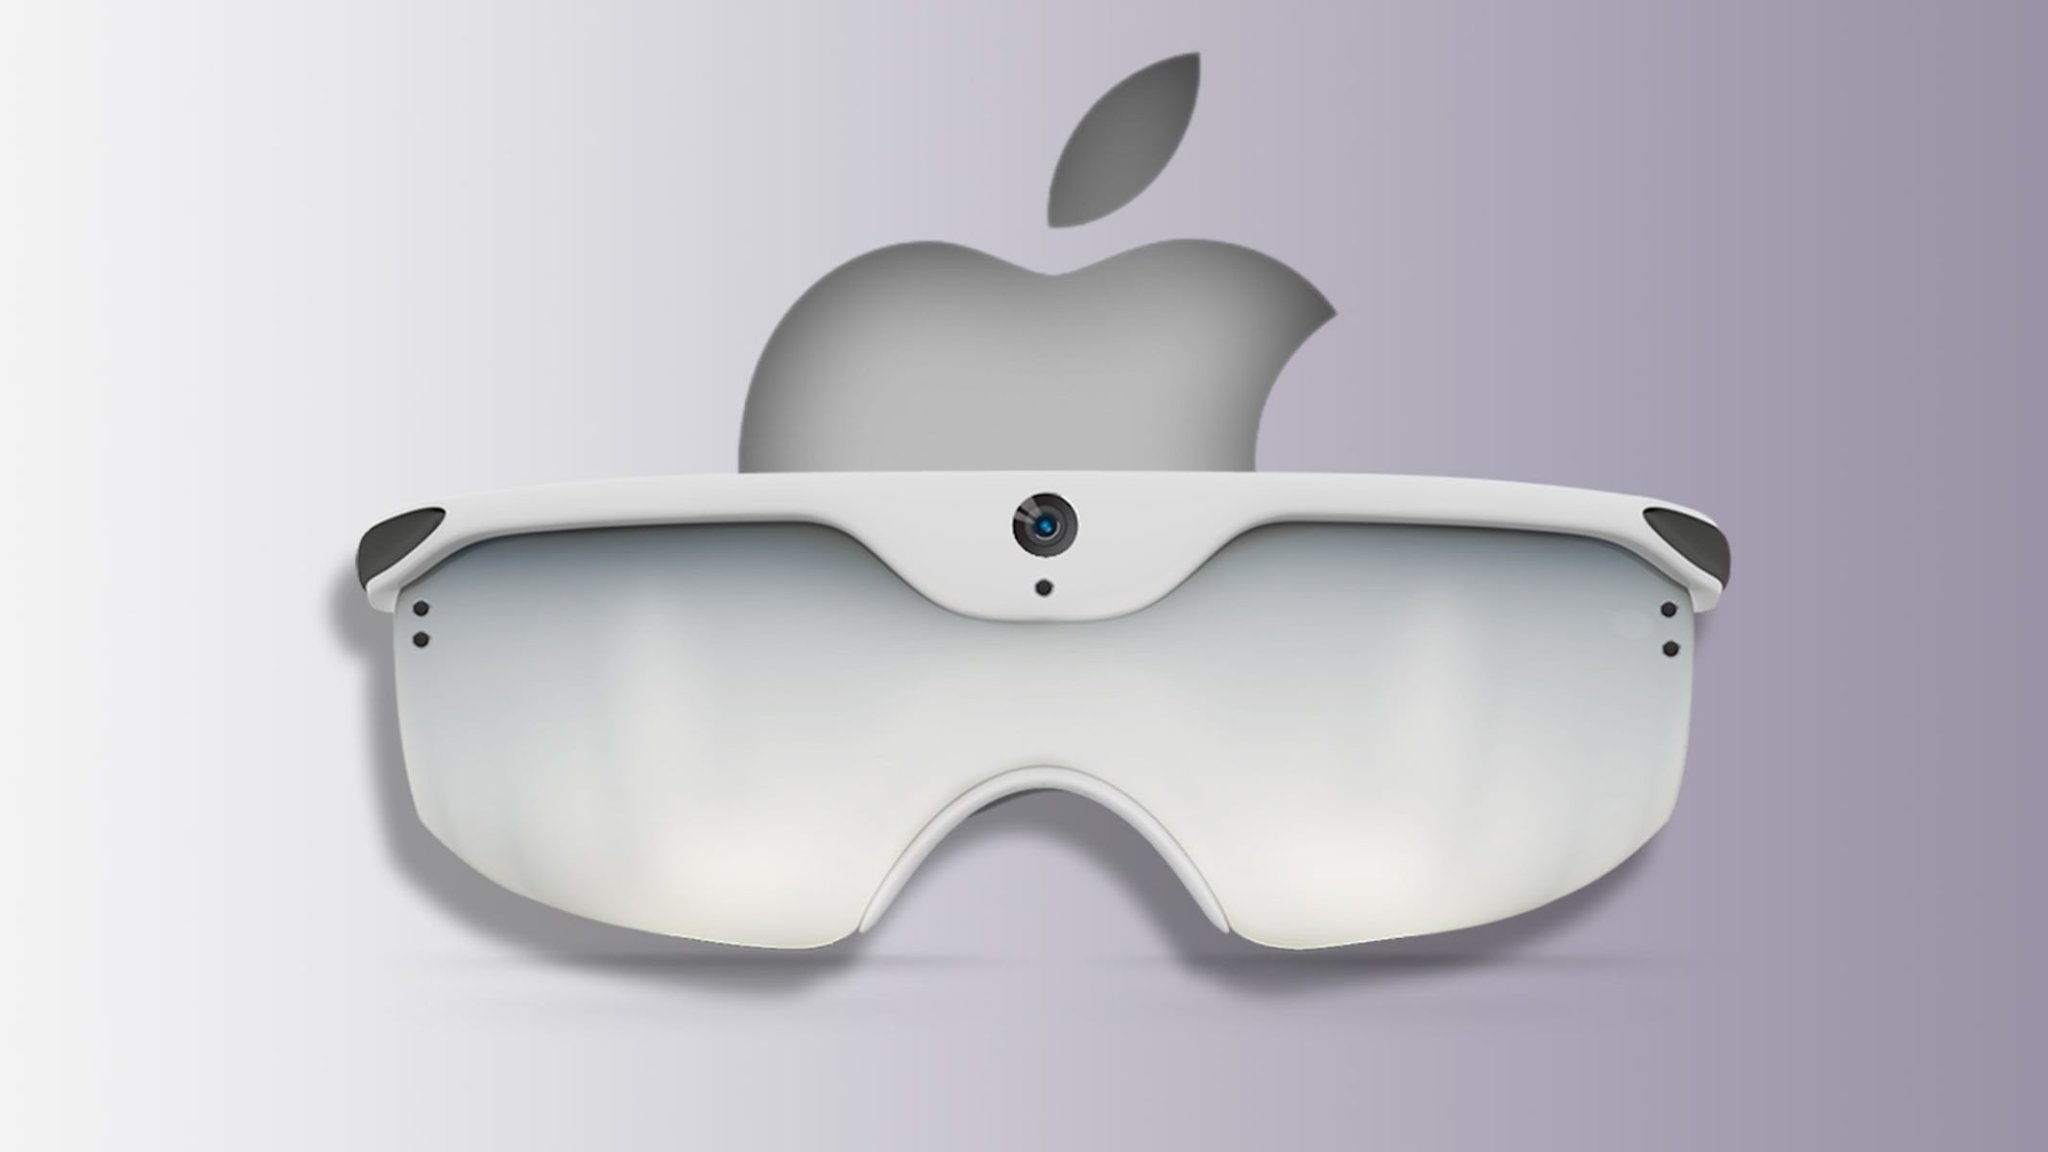 Apple Glasses—everything we know so far